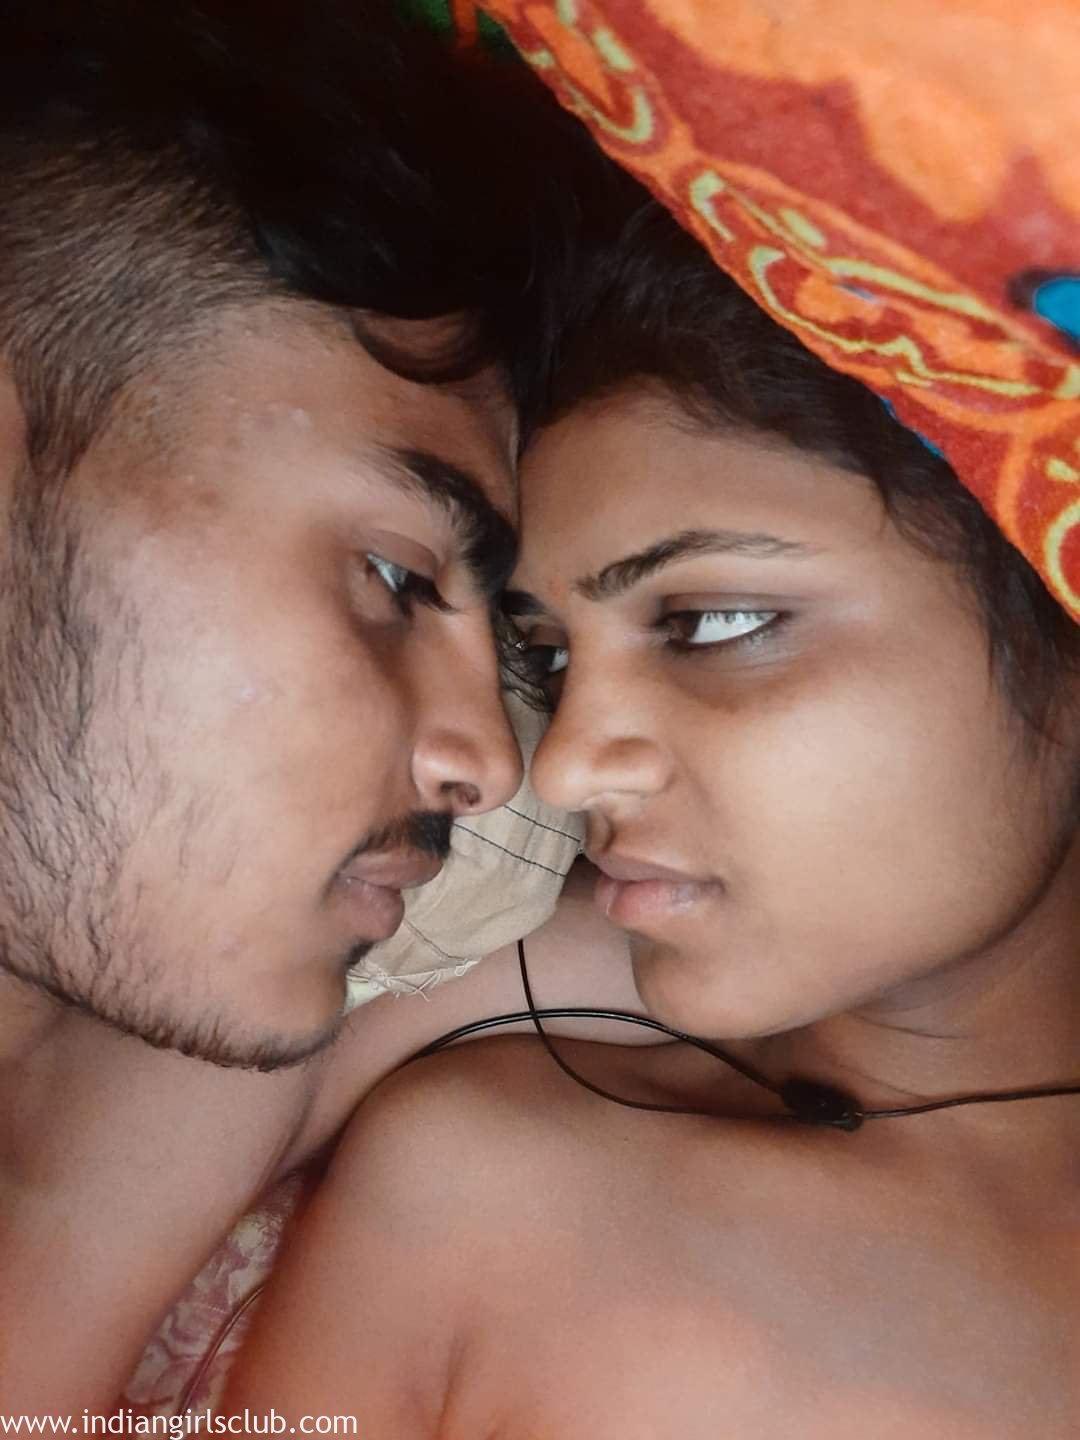 College Romance Xxx - Tamil College Couple Romantic Bedroom Sex In Desi Style - Indian Girls Club